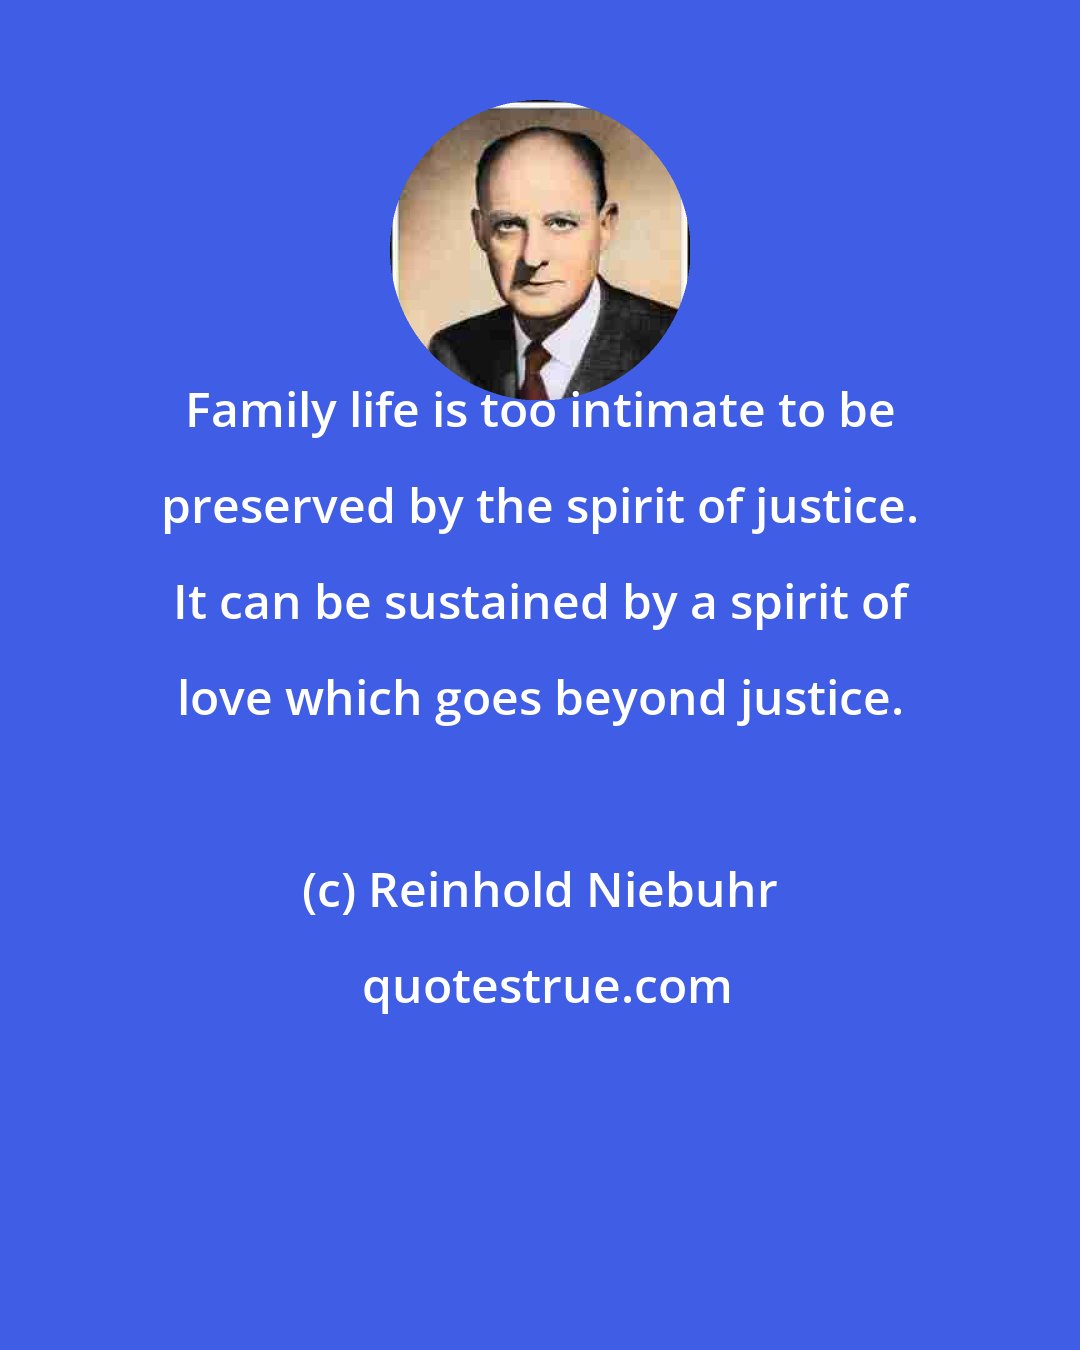 Reinhold Niebuhr: Family life is too intimate to be preserved by the spirit of justice. It can be sustained by a spirit of love which goes beyond justice.